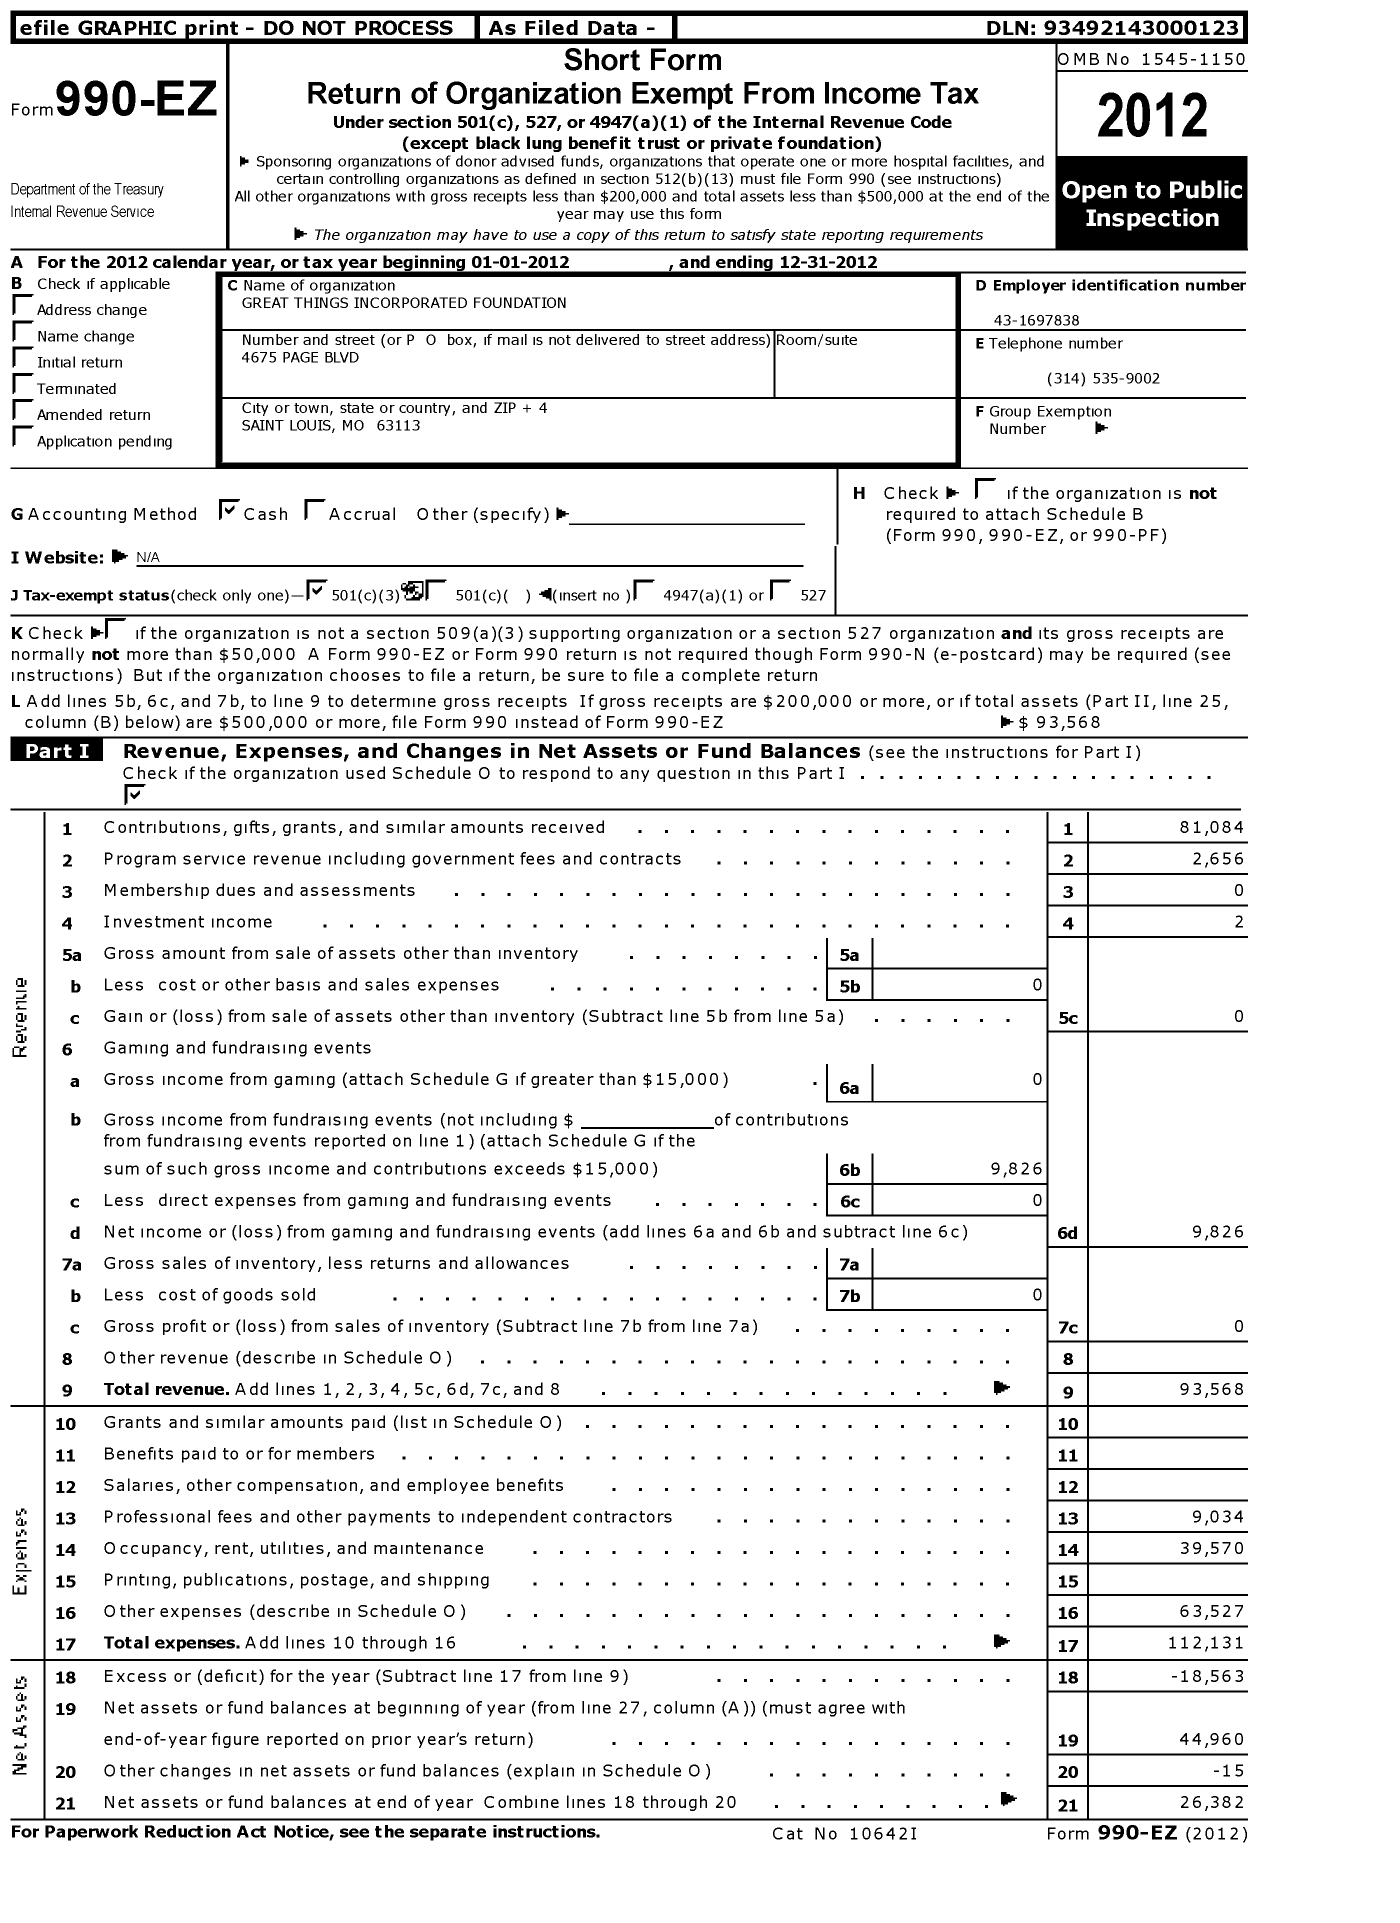 Image of first page of 2012 Form 990EZ for Great Things Incorporated Foundation